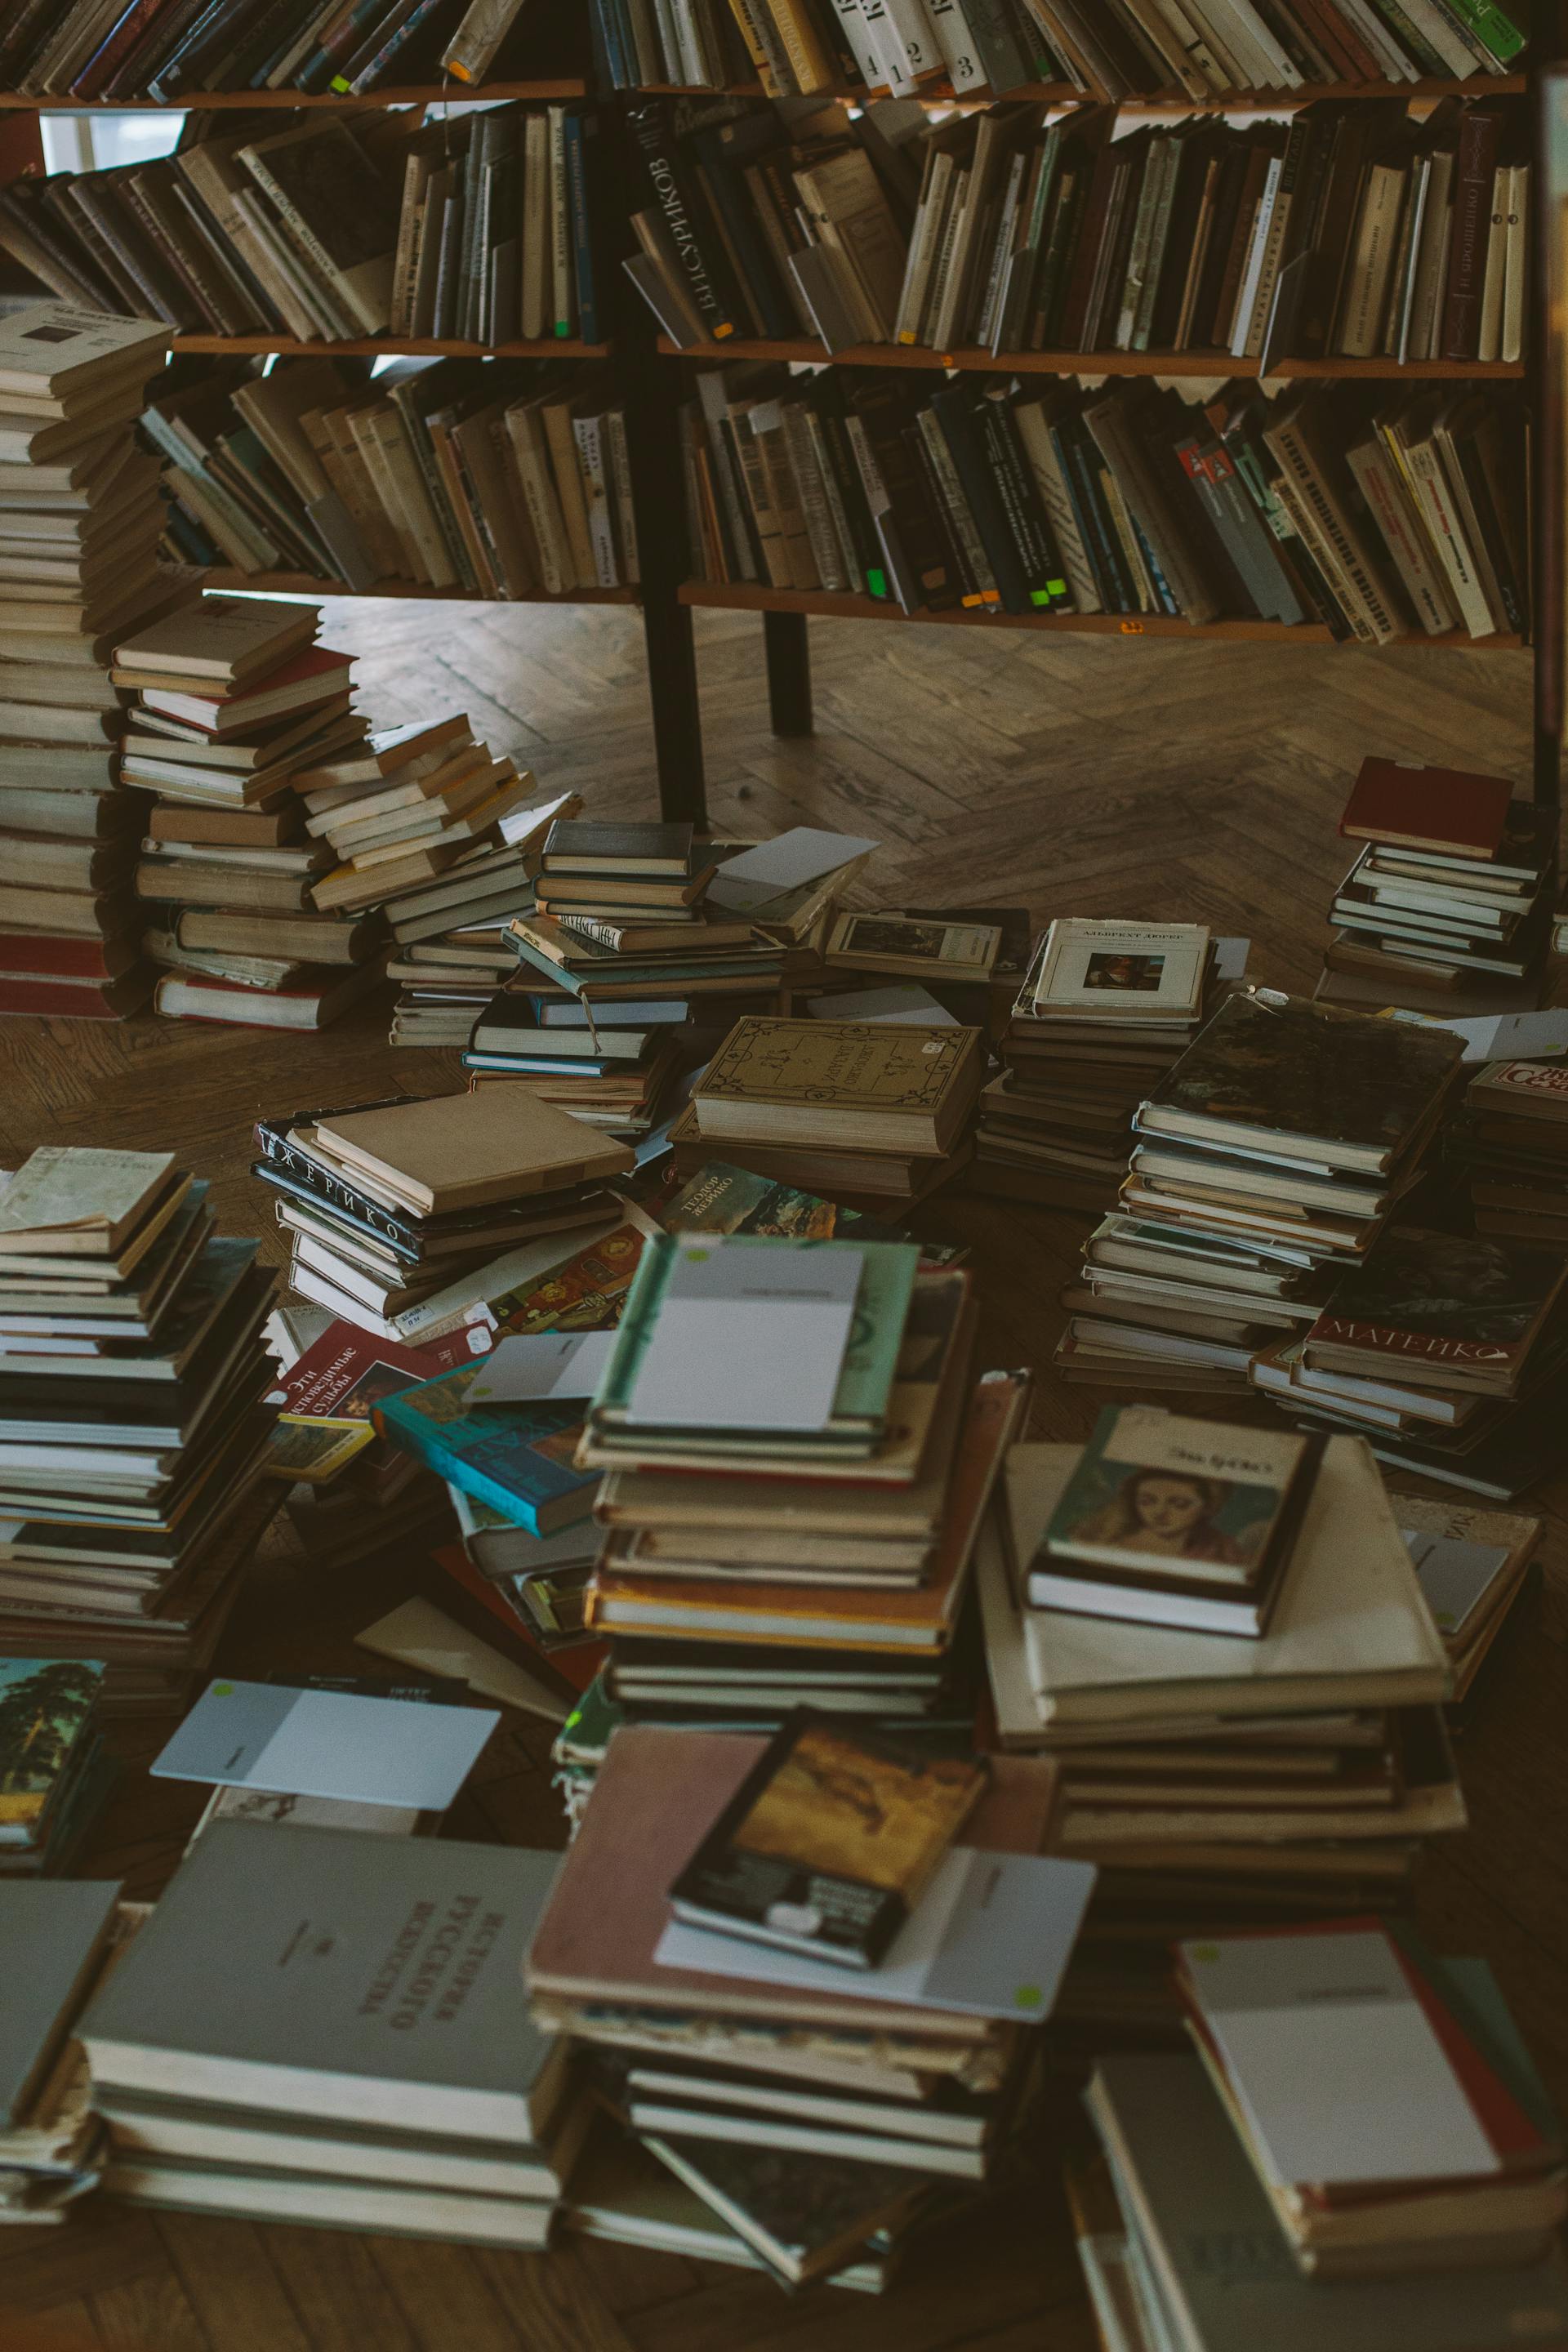 A collection of old books | Source: Pexels